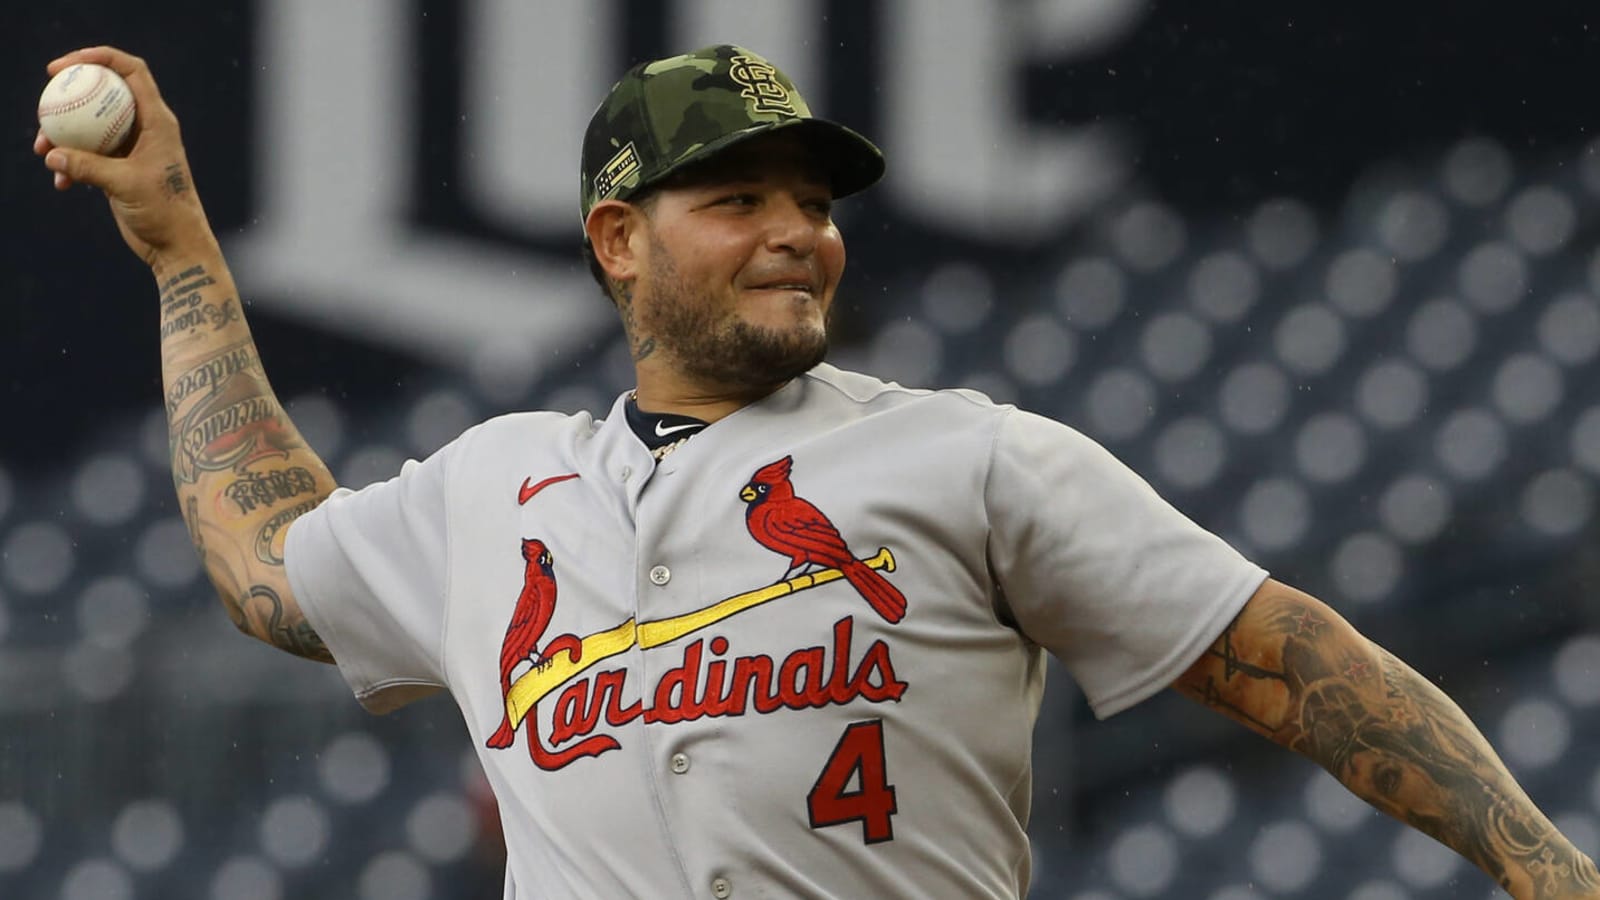 Yadier Molina expected to land on IL with knee soreness